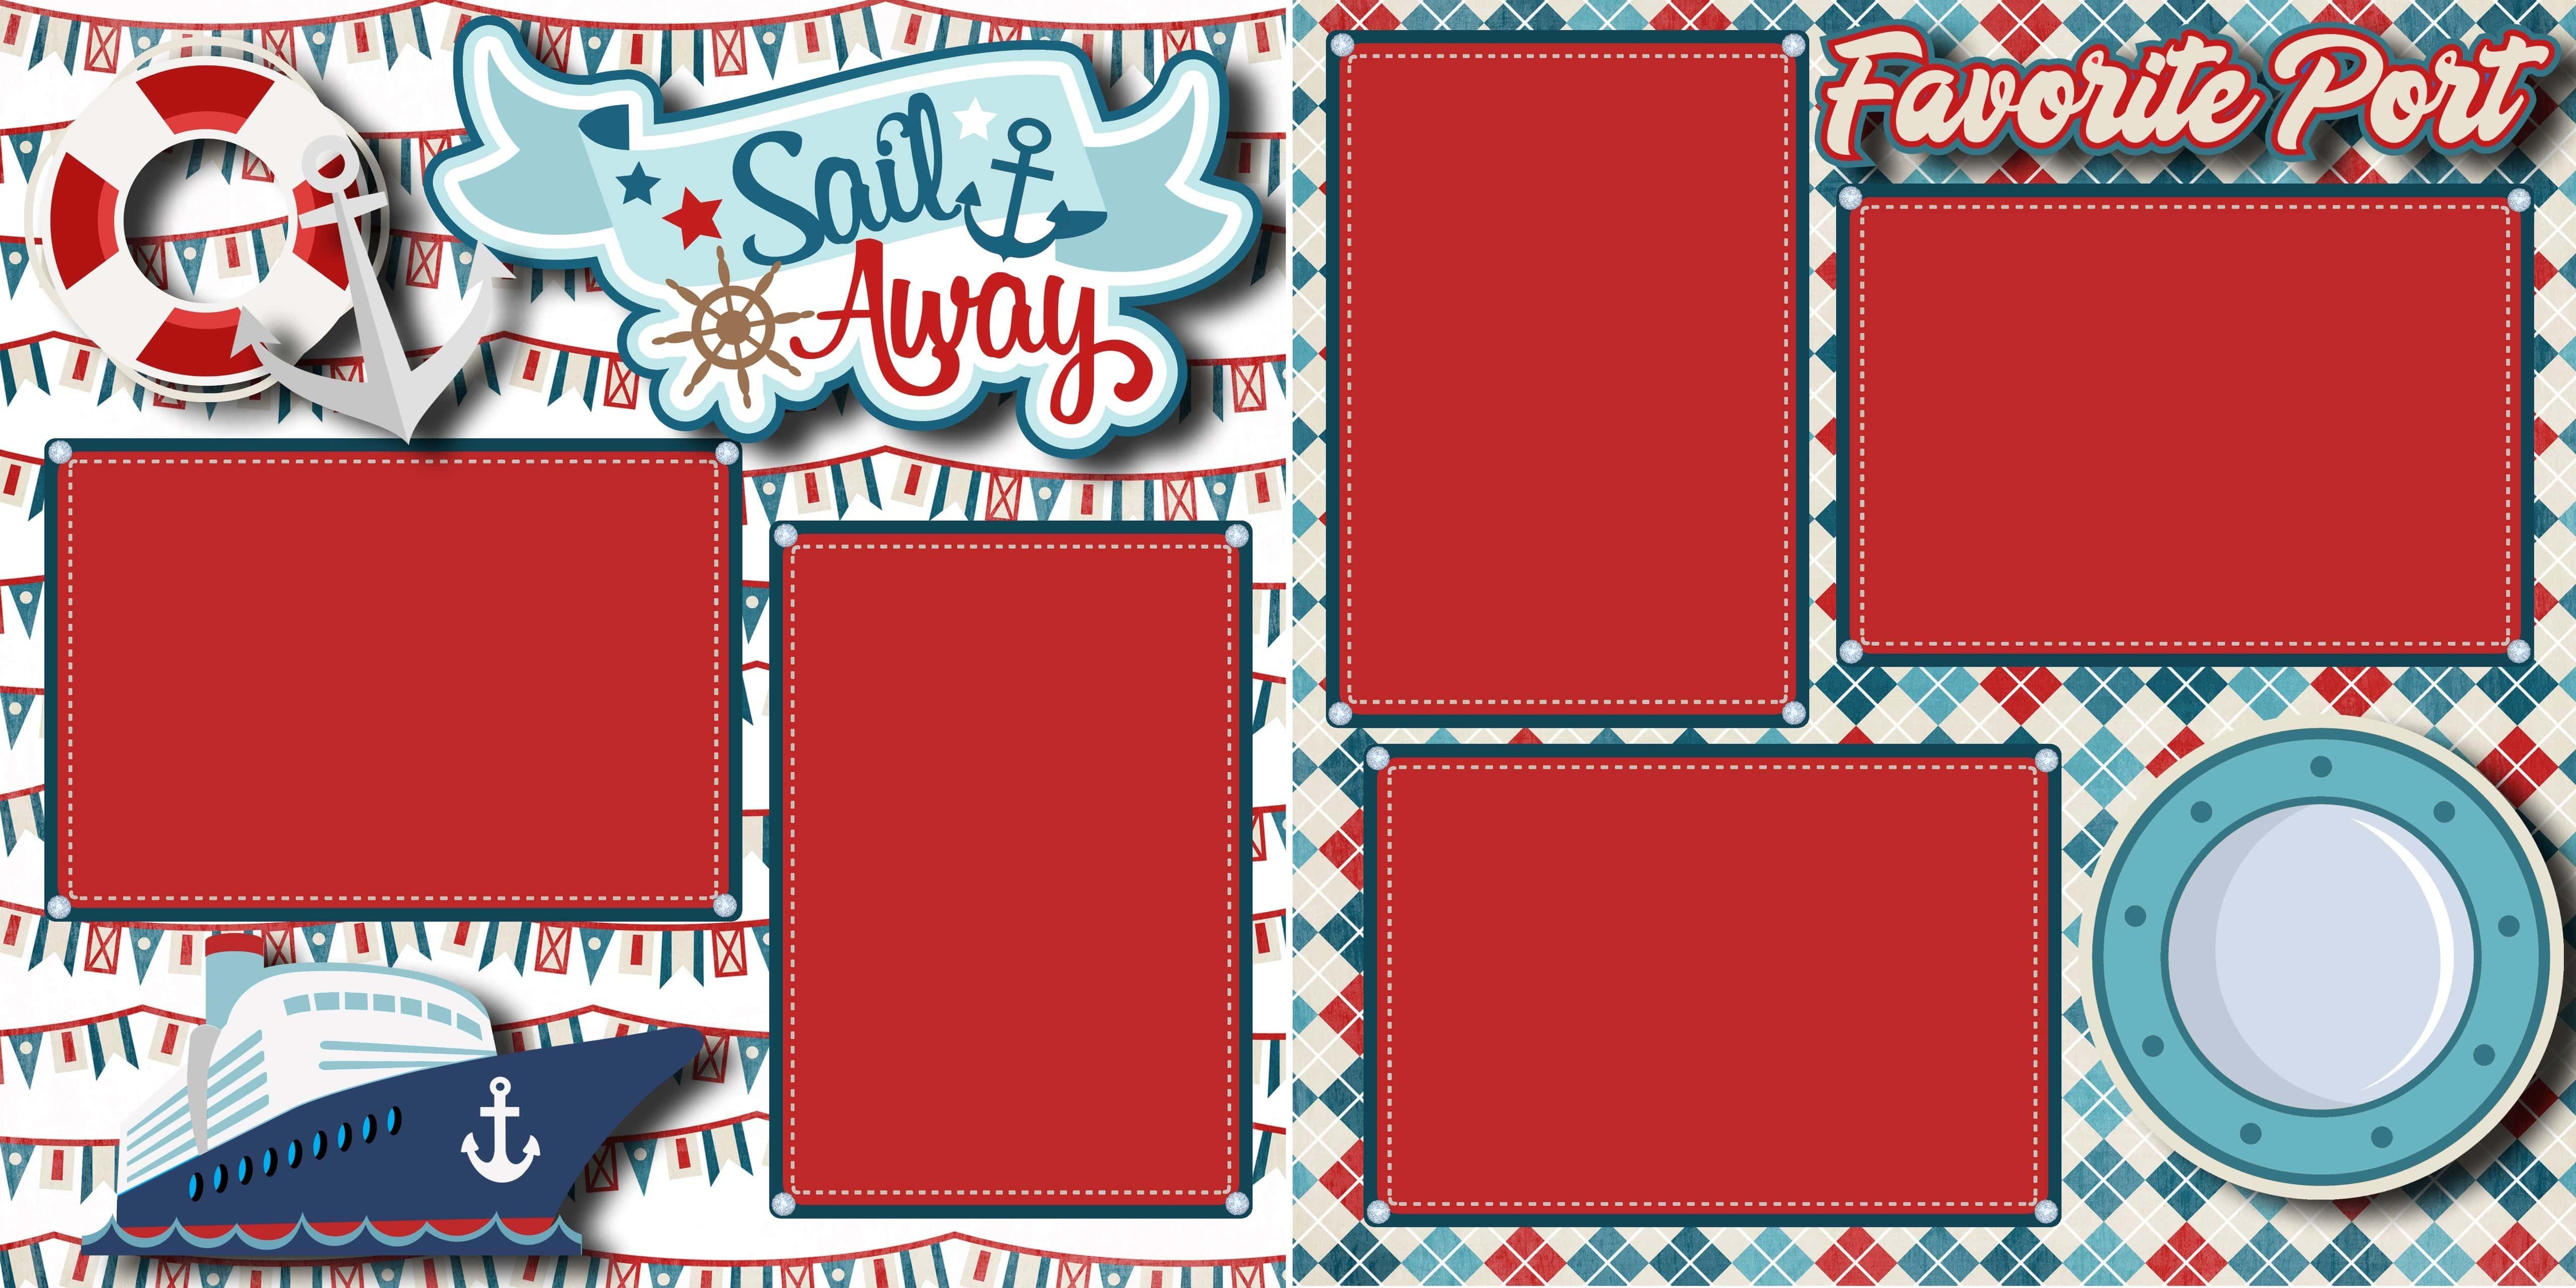 Sail Away (2) - 12 x 12 Premade, Printed Scrapbook Pages by SSC Designs